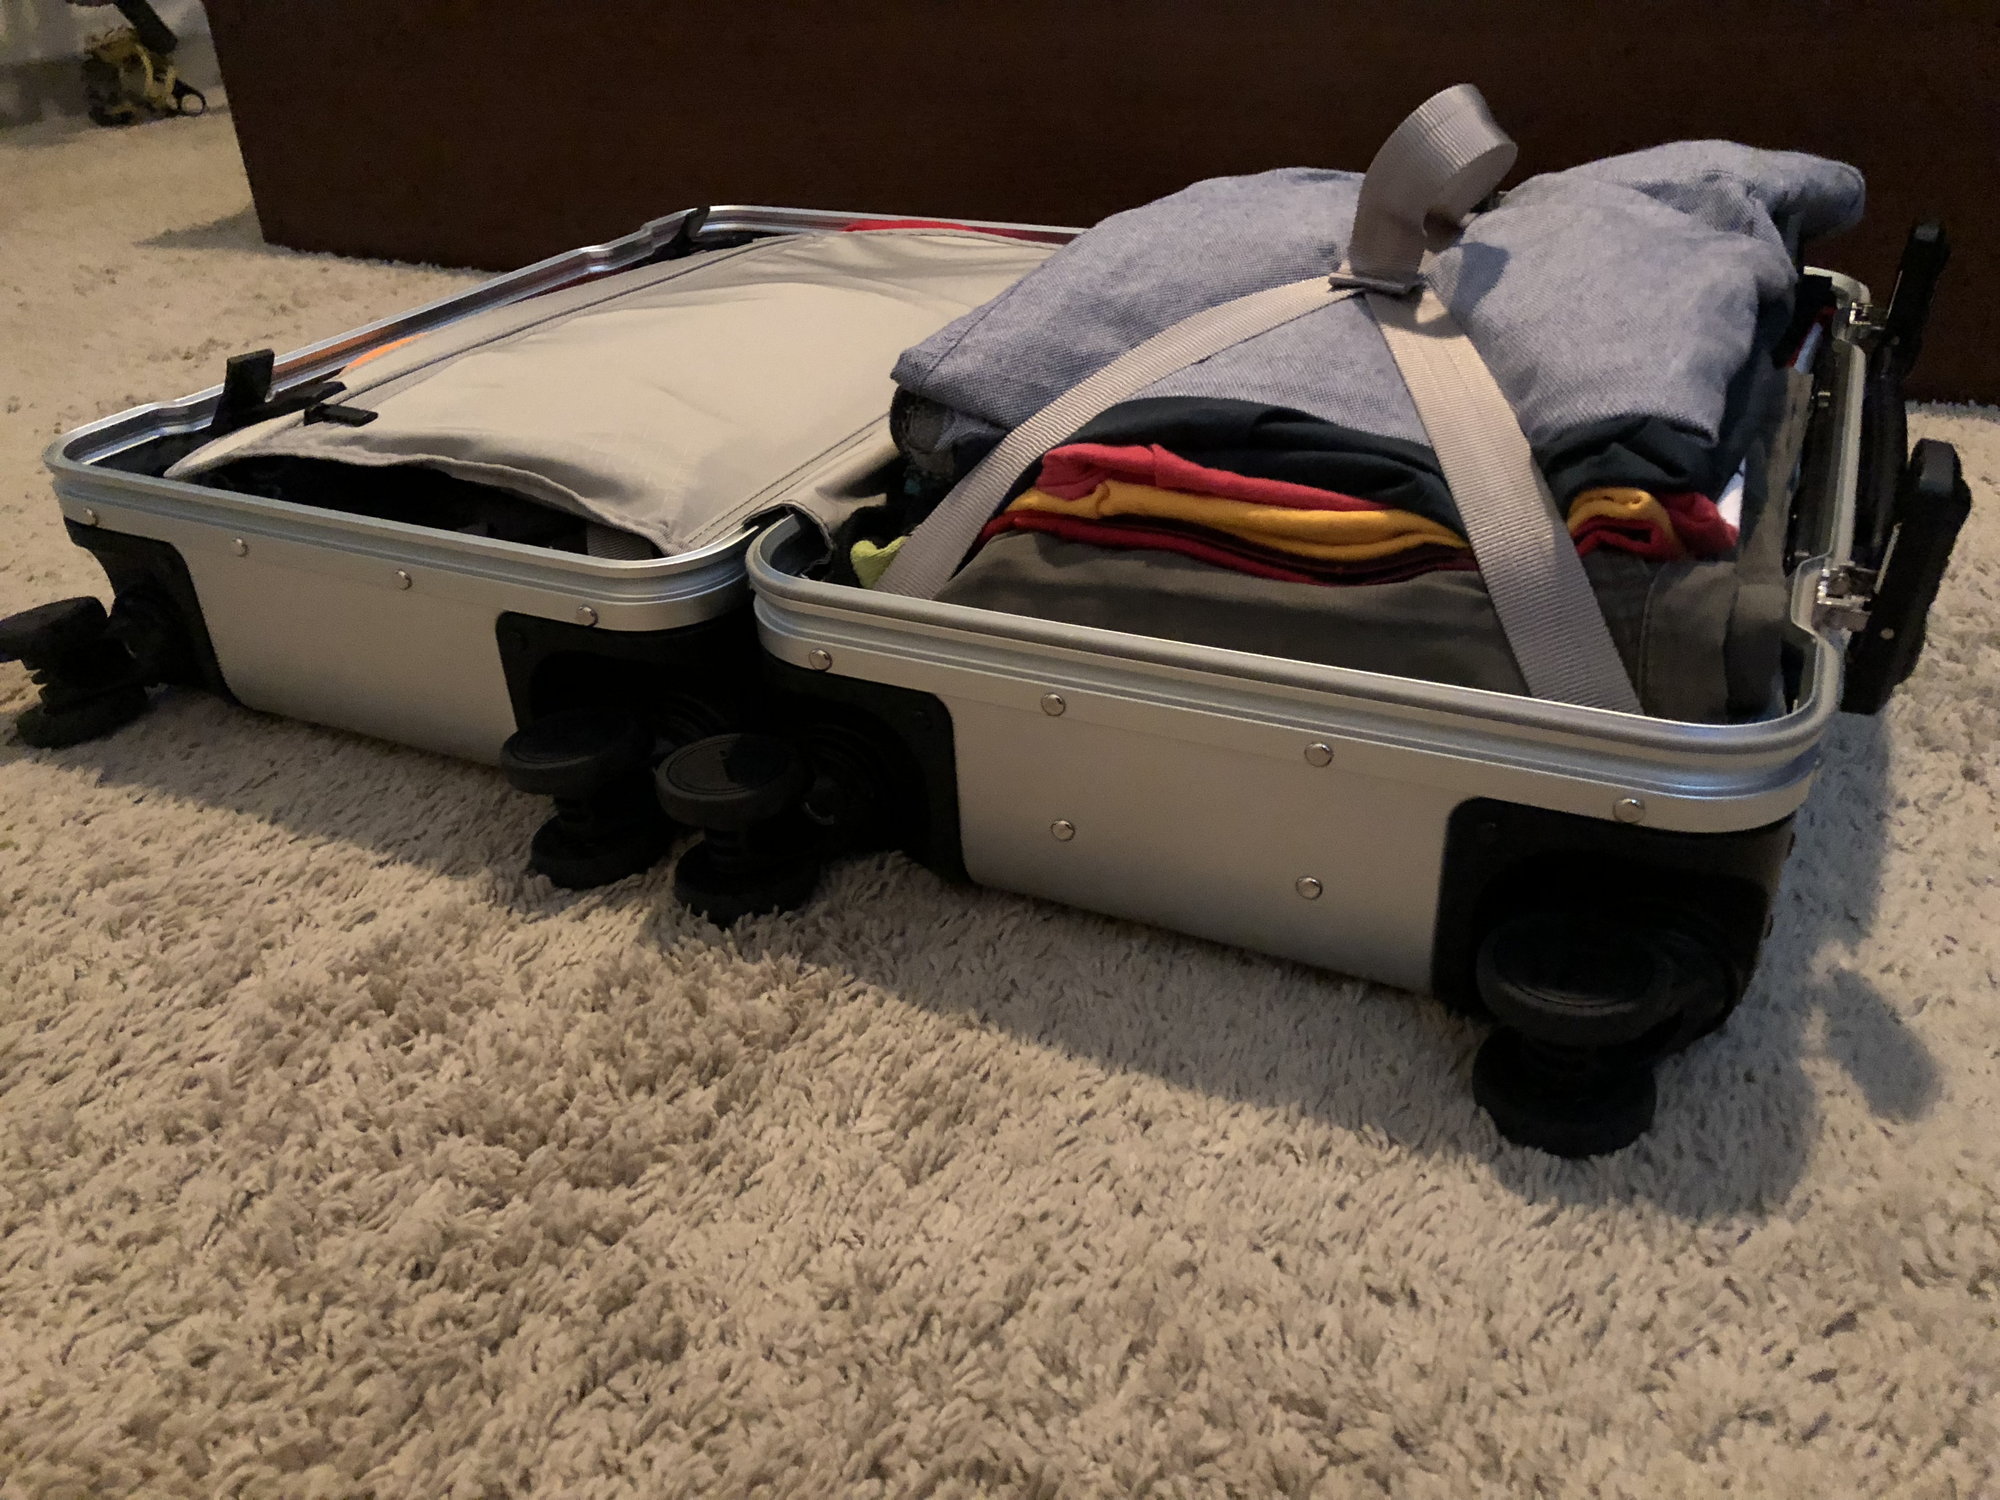 Is Rimowa as bad as people say? - FlyerTalk Forums